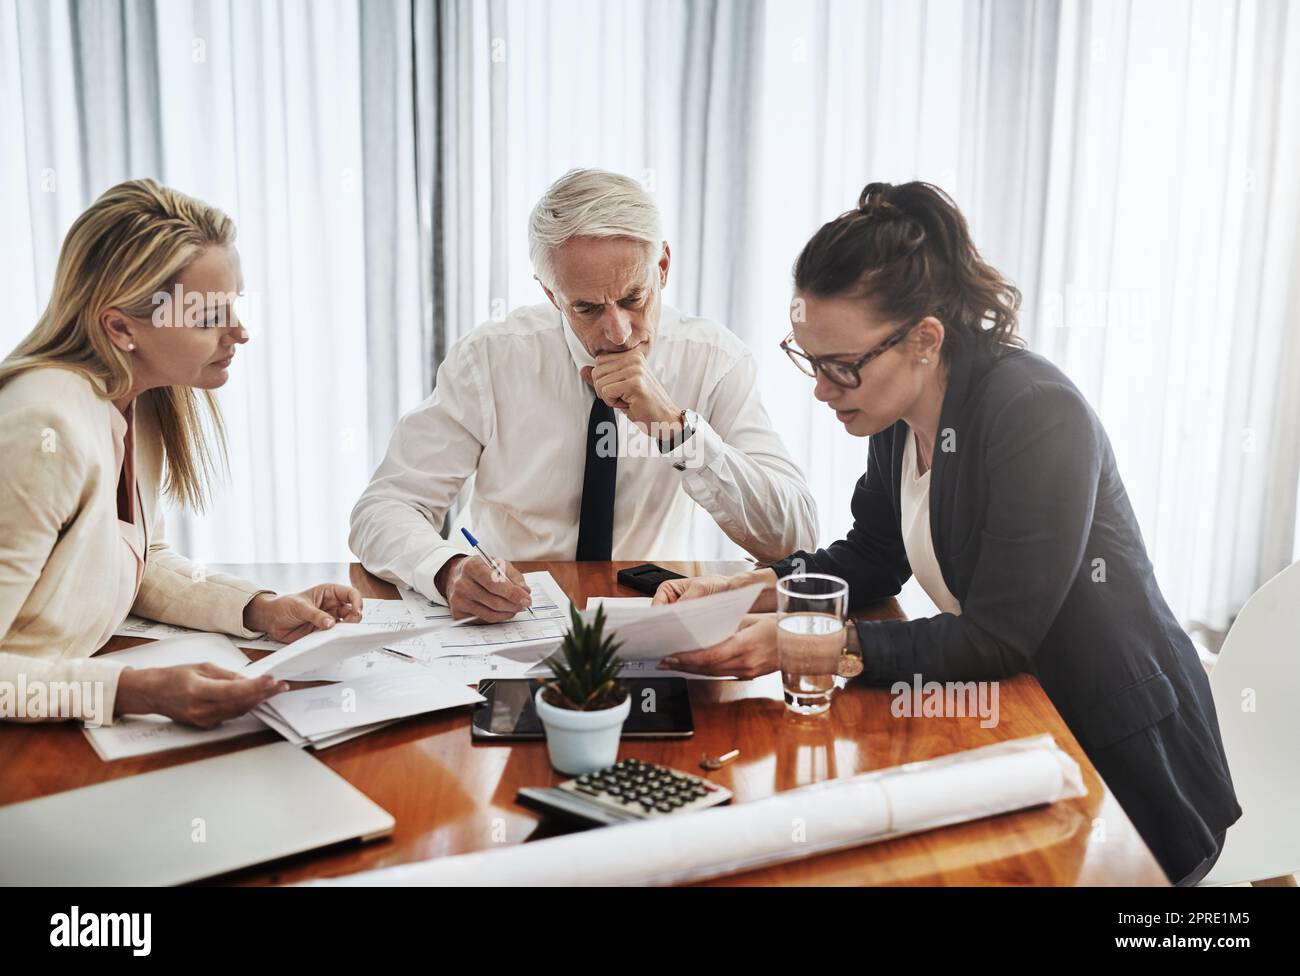 Thinking as a group. a group of architects working together on blueprints of a house around a table inside of a building. Stock Photo